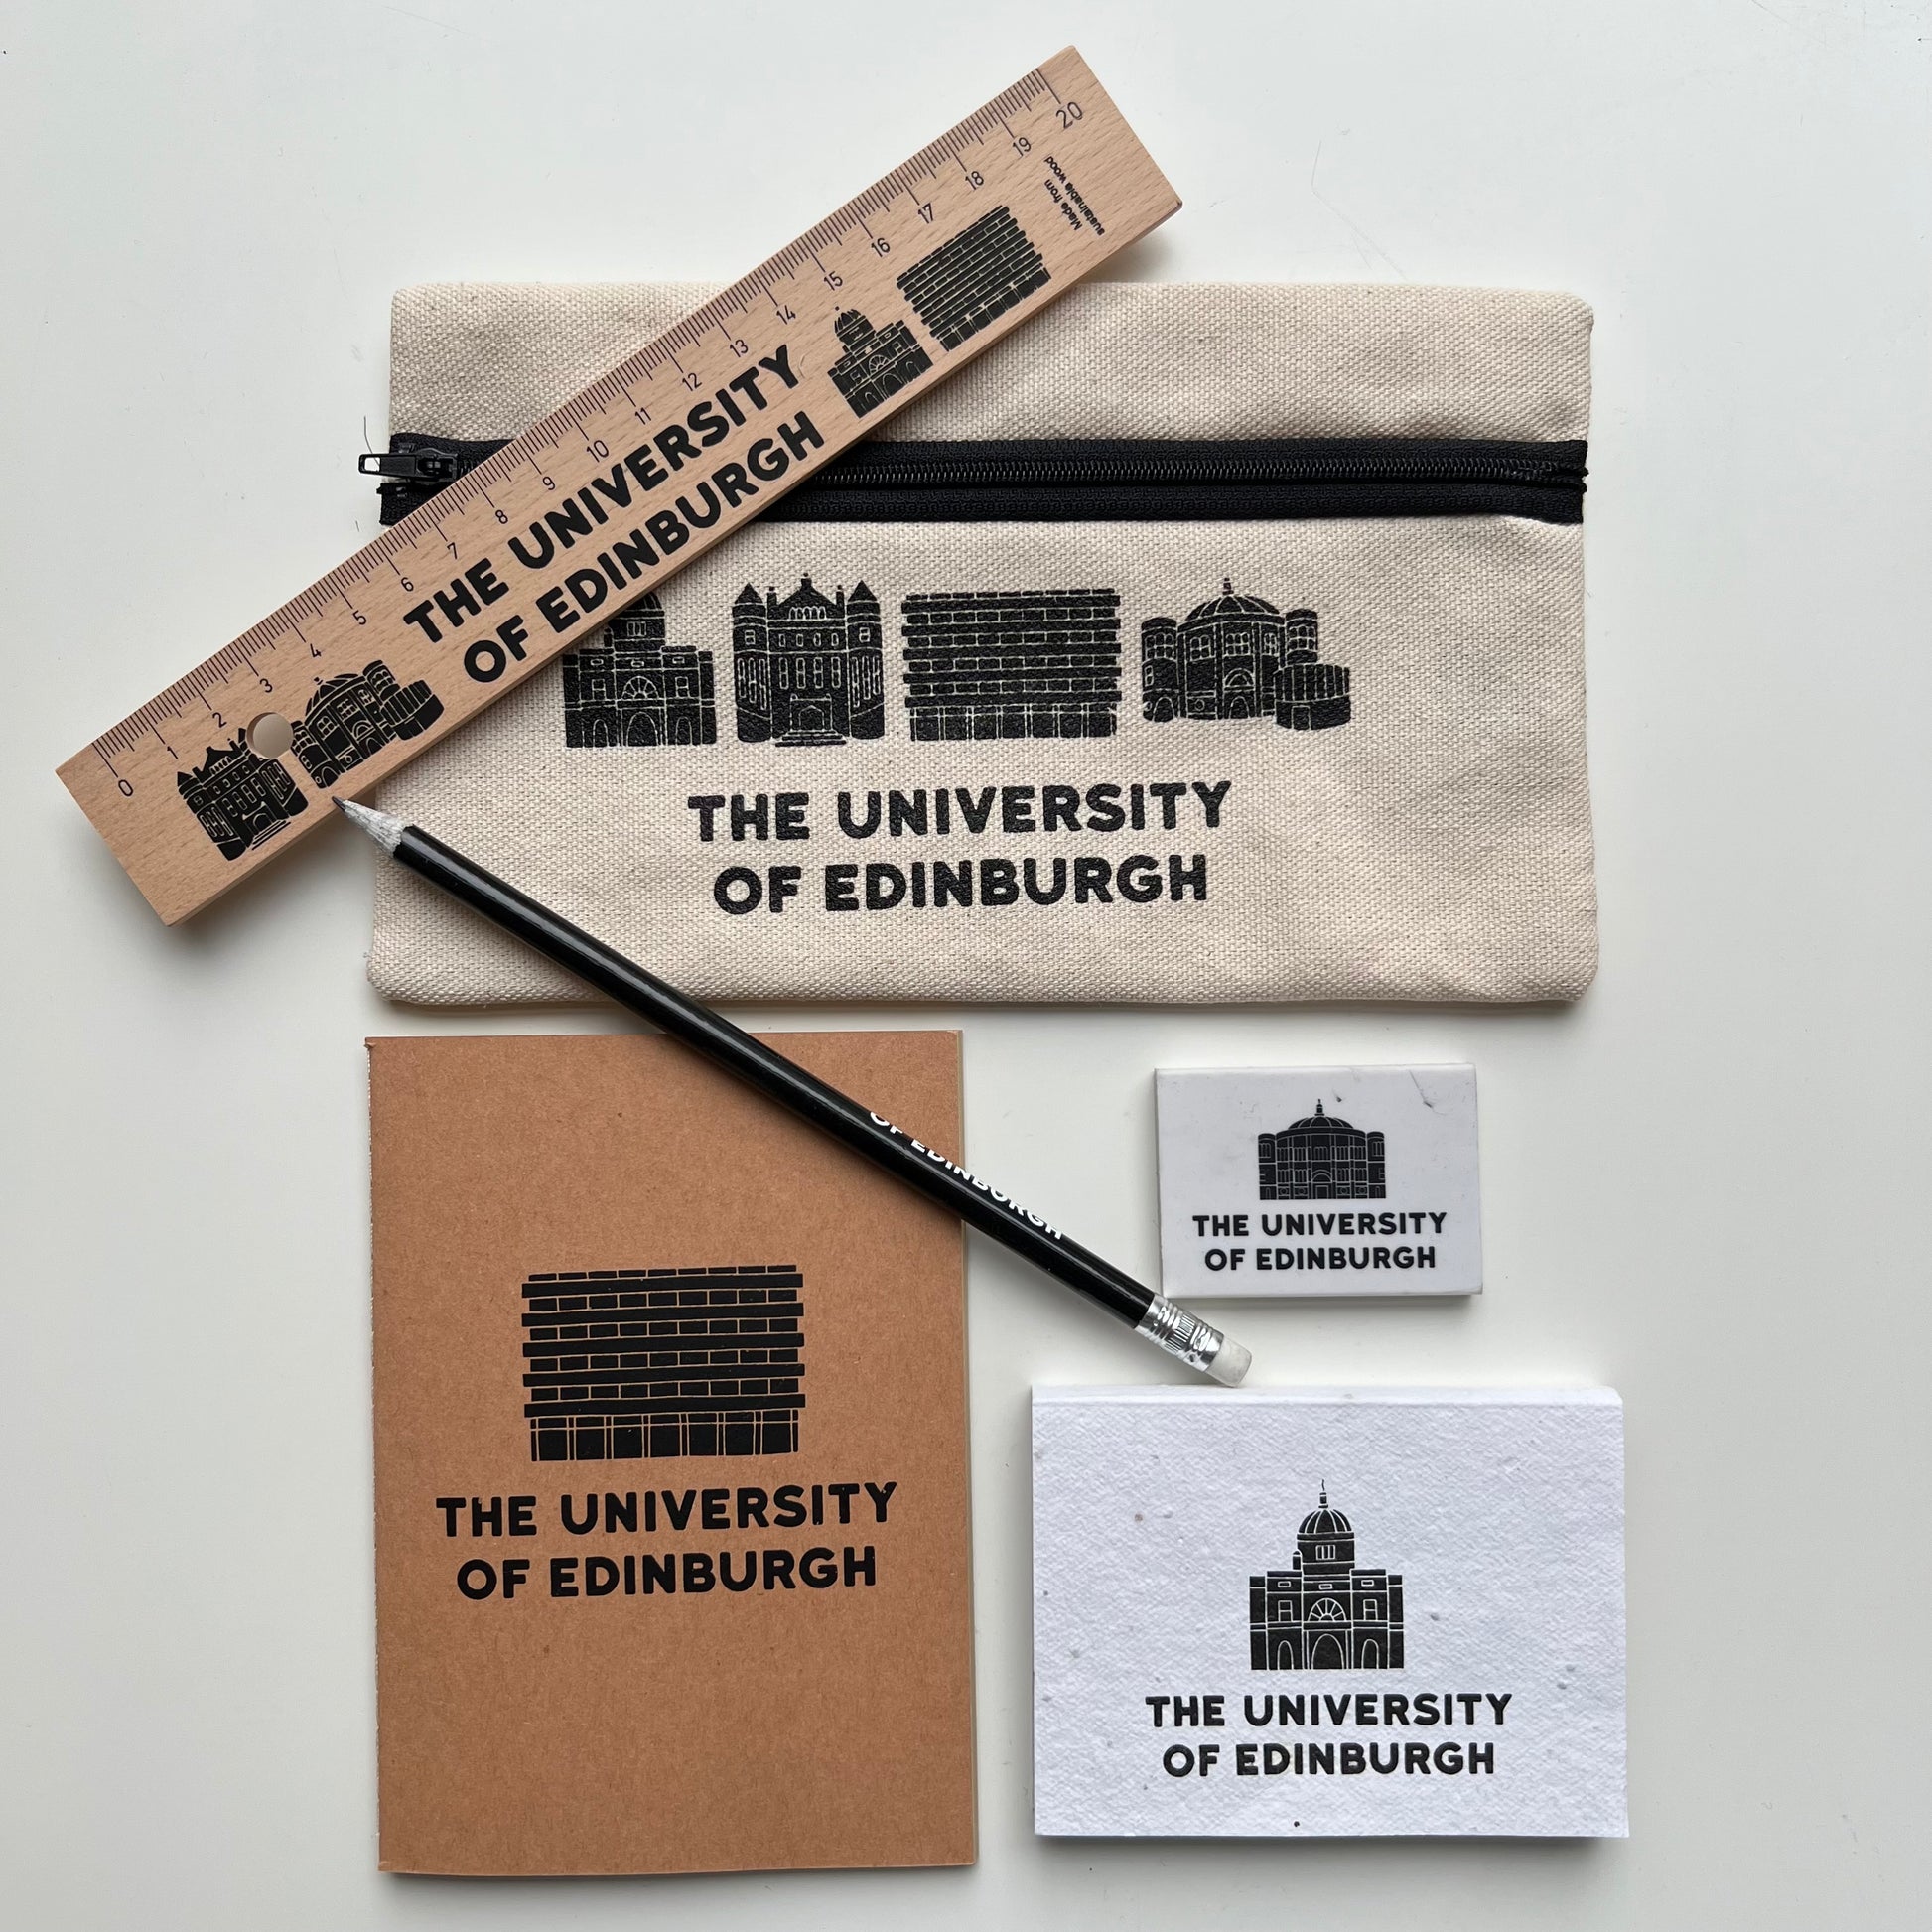 Our study range including our Wooden Ruler, Organic Cotton Pencil Case, Recycled Newspaper Pencil, McEwan Hall Eraser, A6 Recycled Notebook & Seeded Sticky Notes 